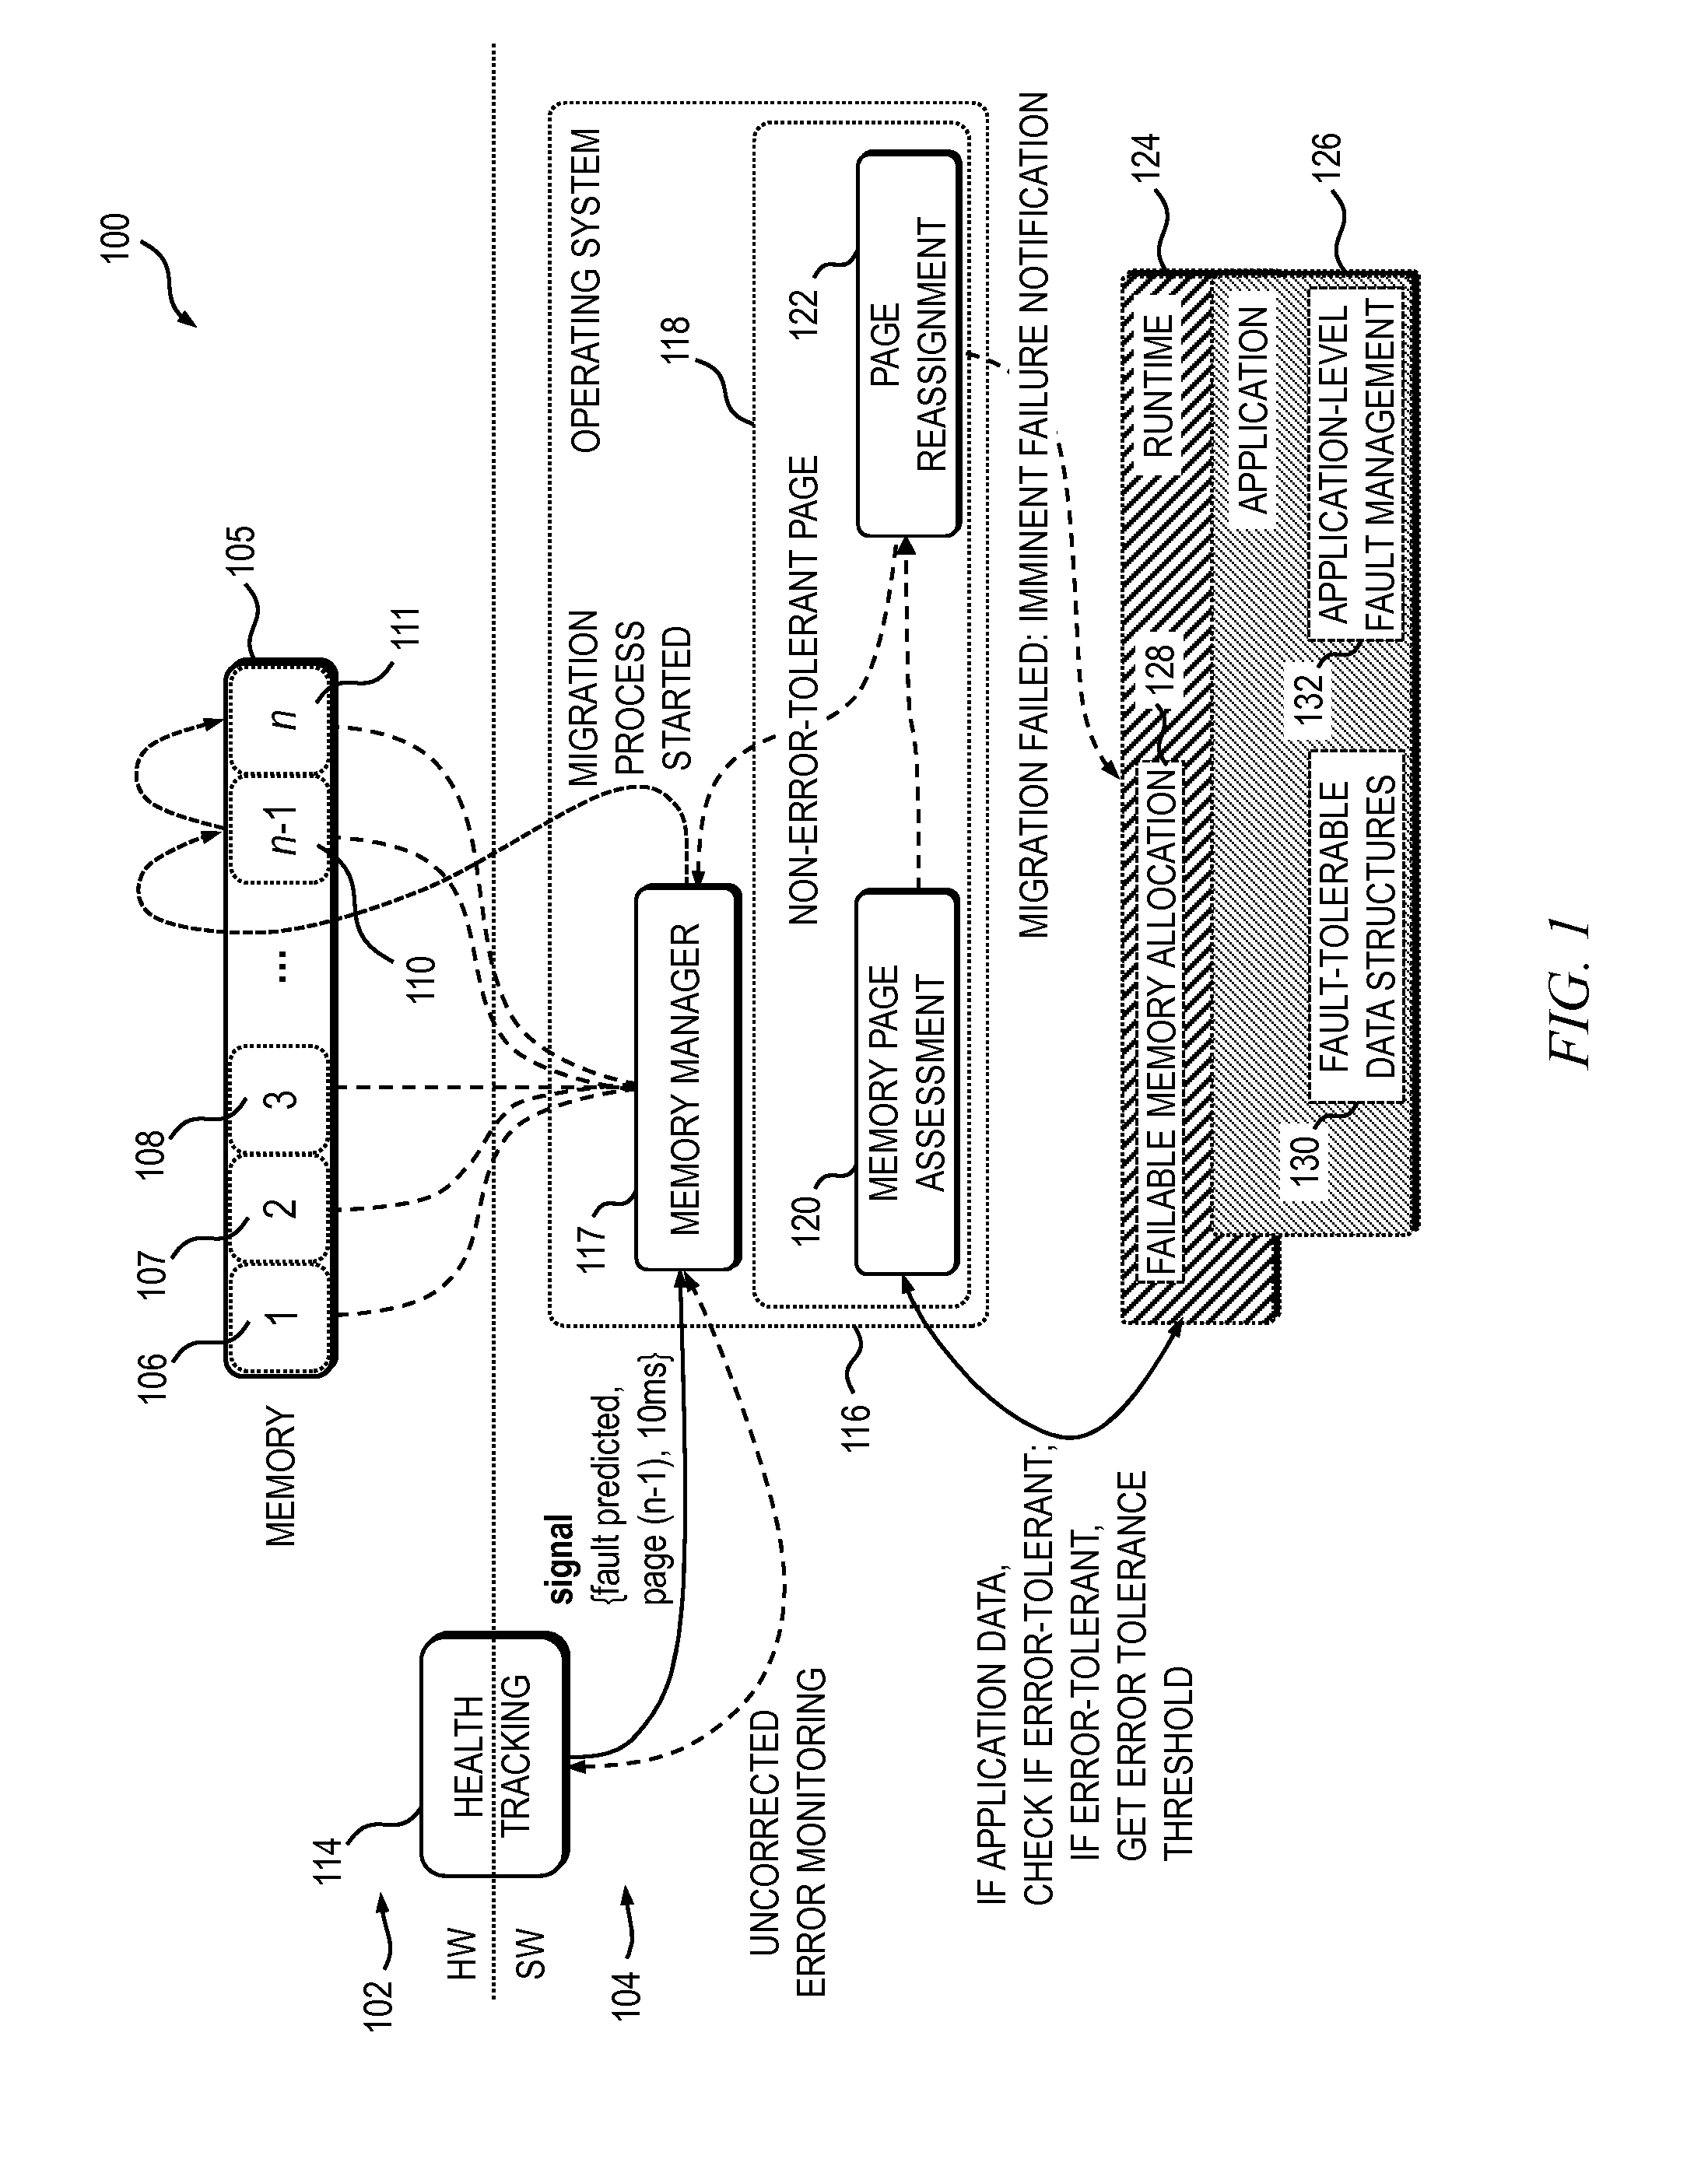 Method and apparatus for faulty memory utilization